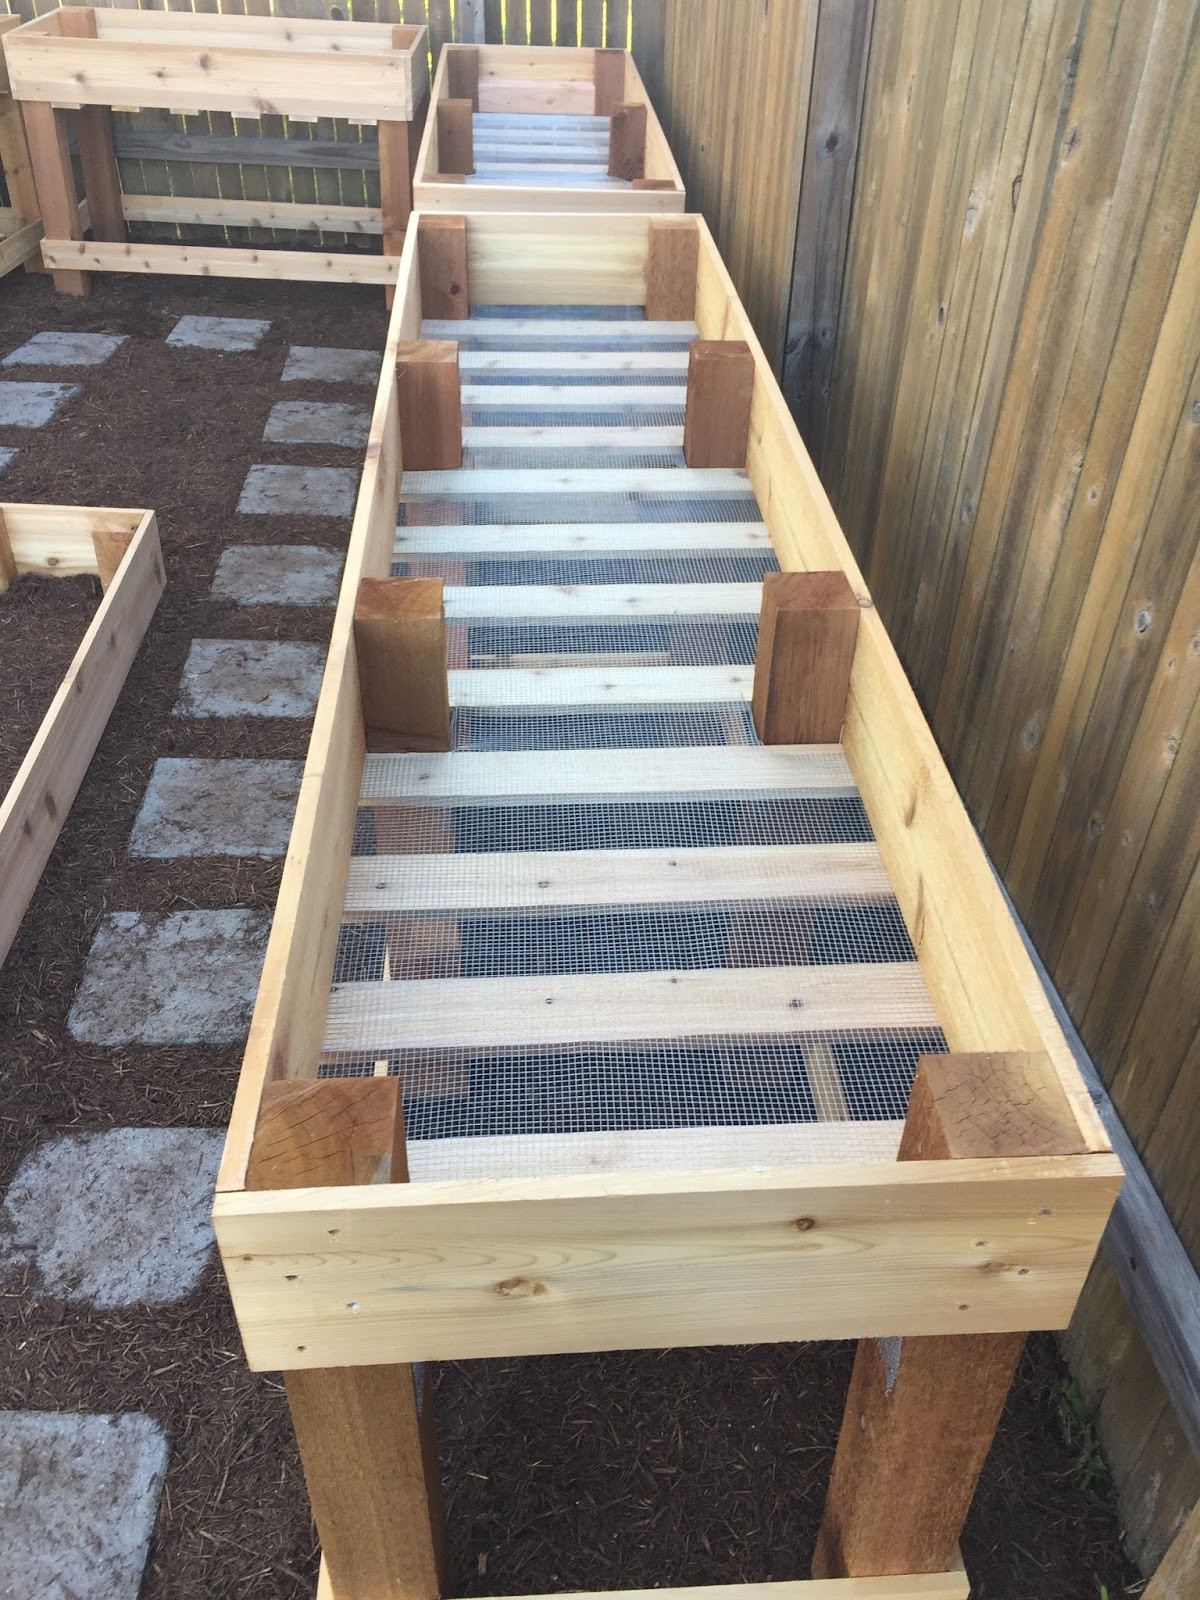 DIY Plans For Raised Beds
 The Wellness PA C DIY Raised Garden Beds